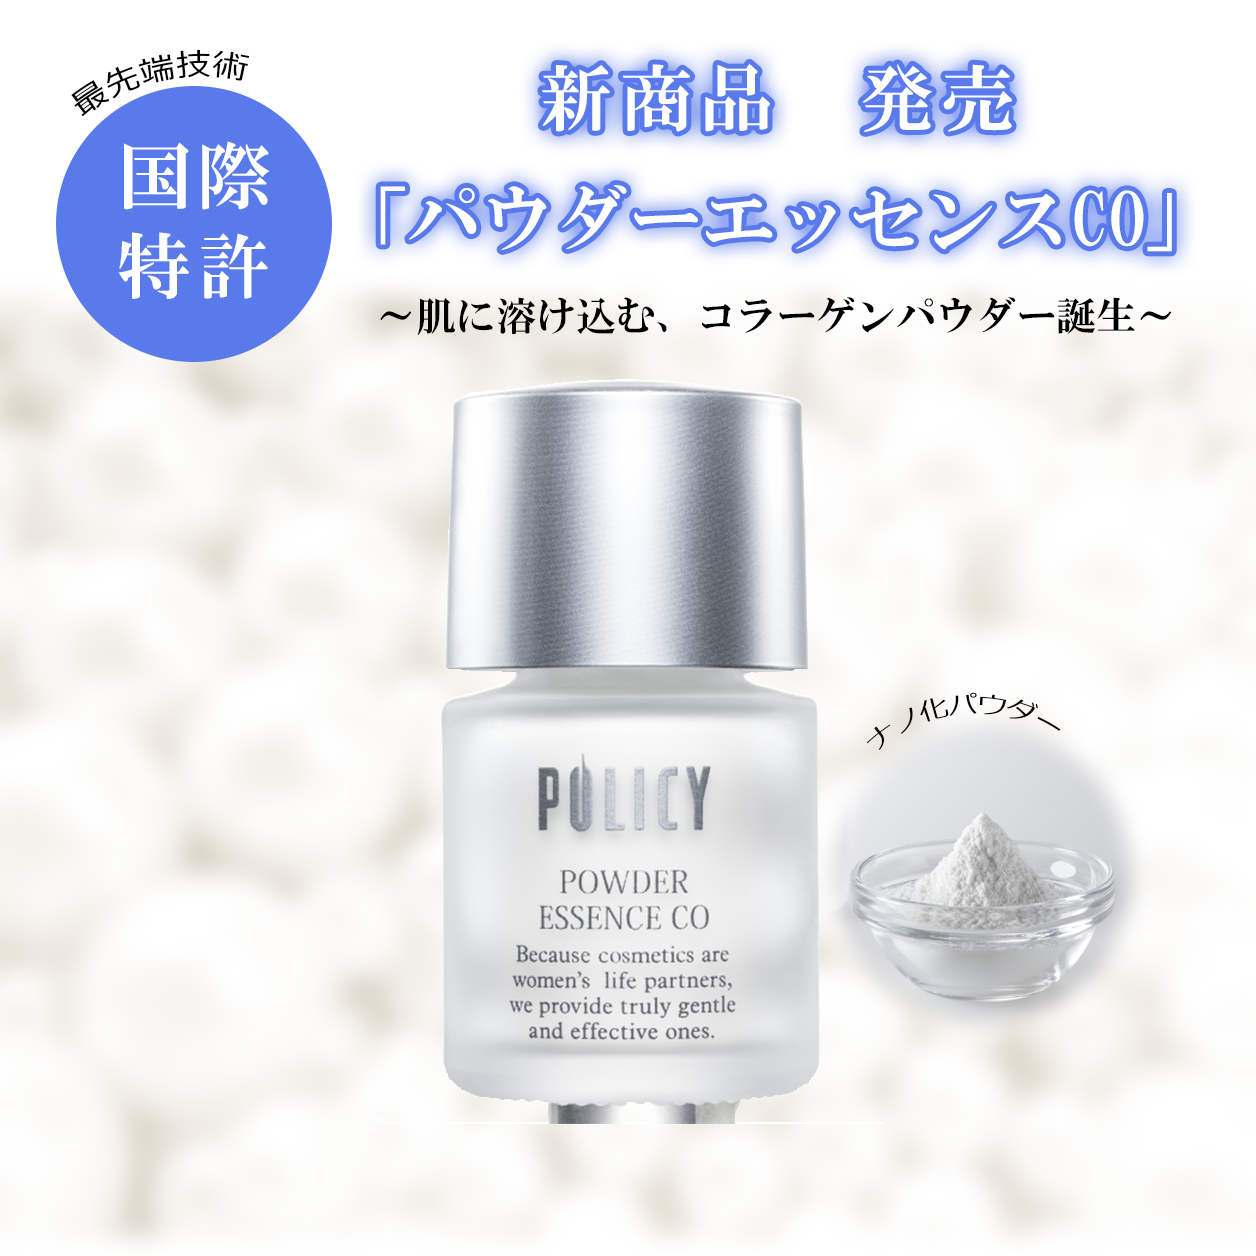 POLICY パウダーエッセンスco - その他